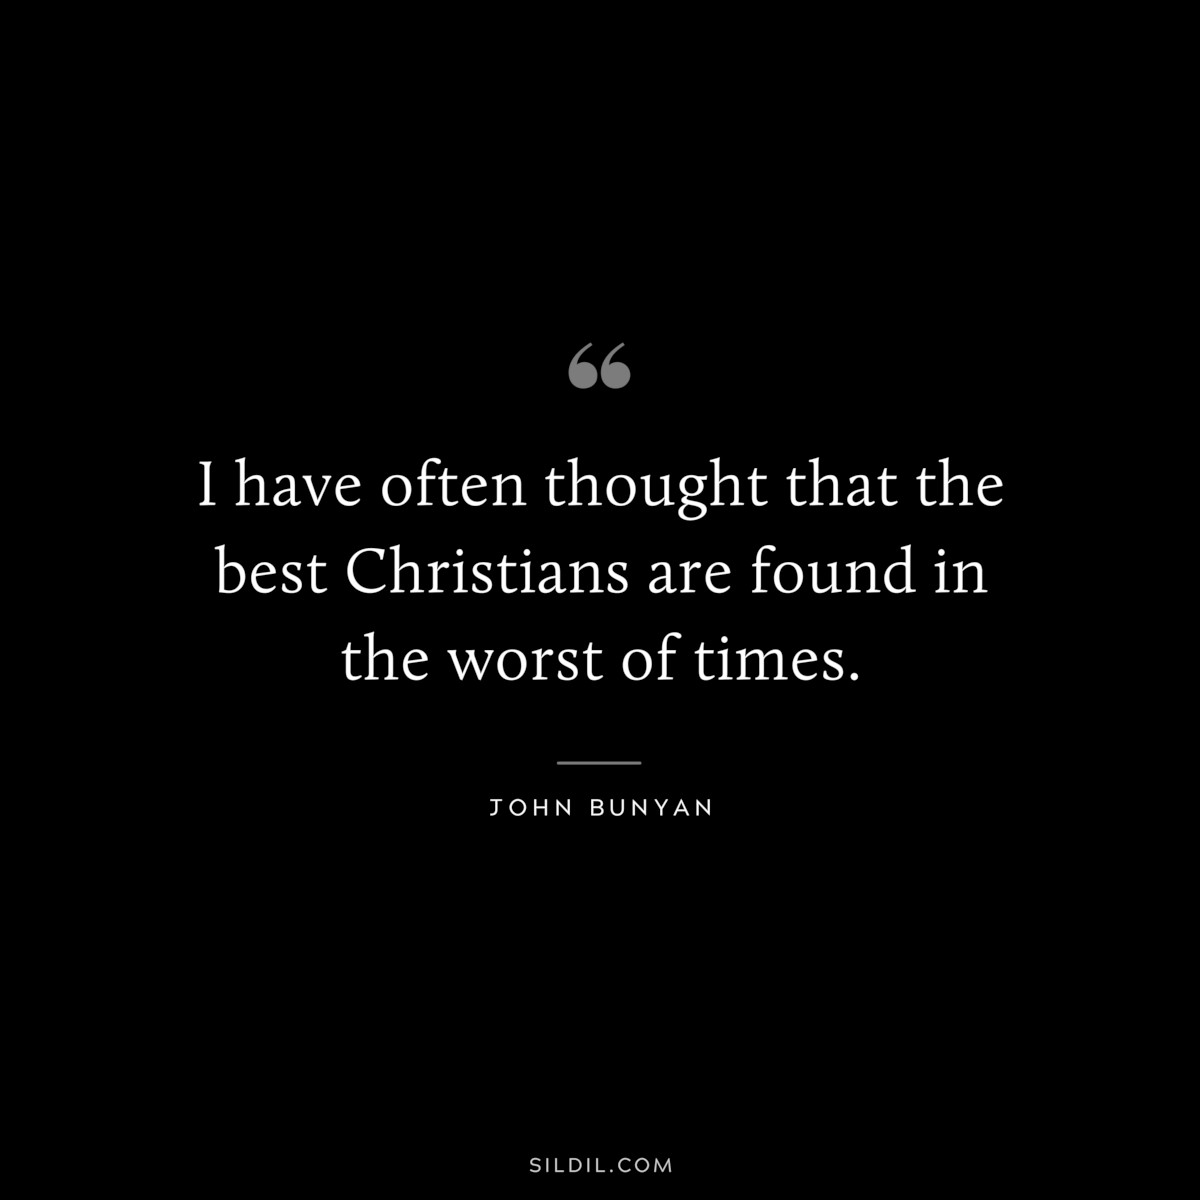 I have often thought that the best Christians are found in the worst of times. ― John Bunyan